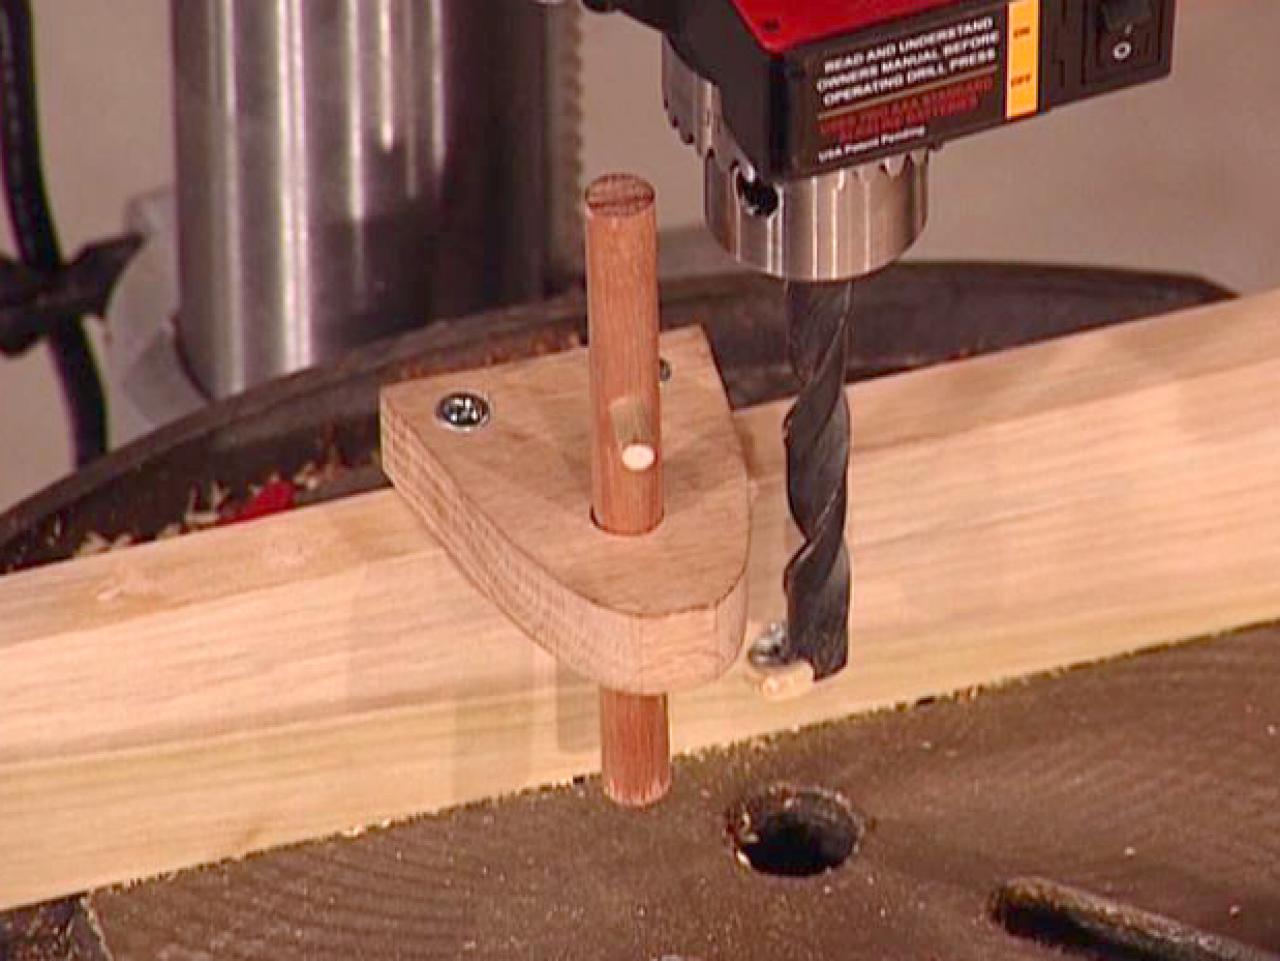 How to Make a Multiple-Hole Jig how-tos DIY